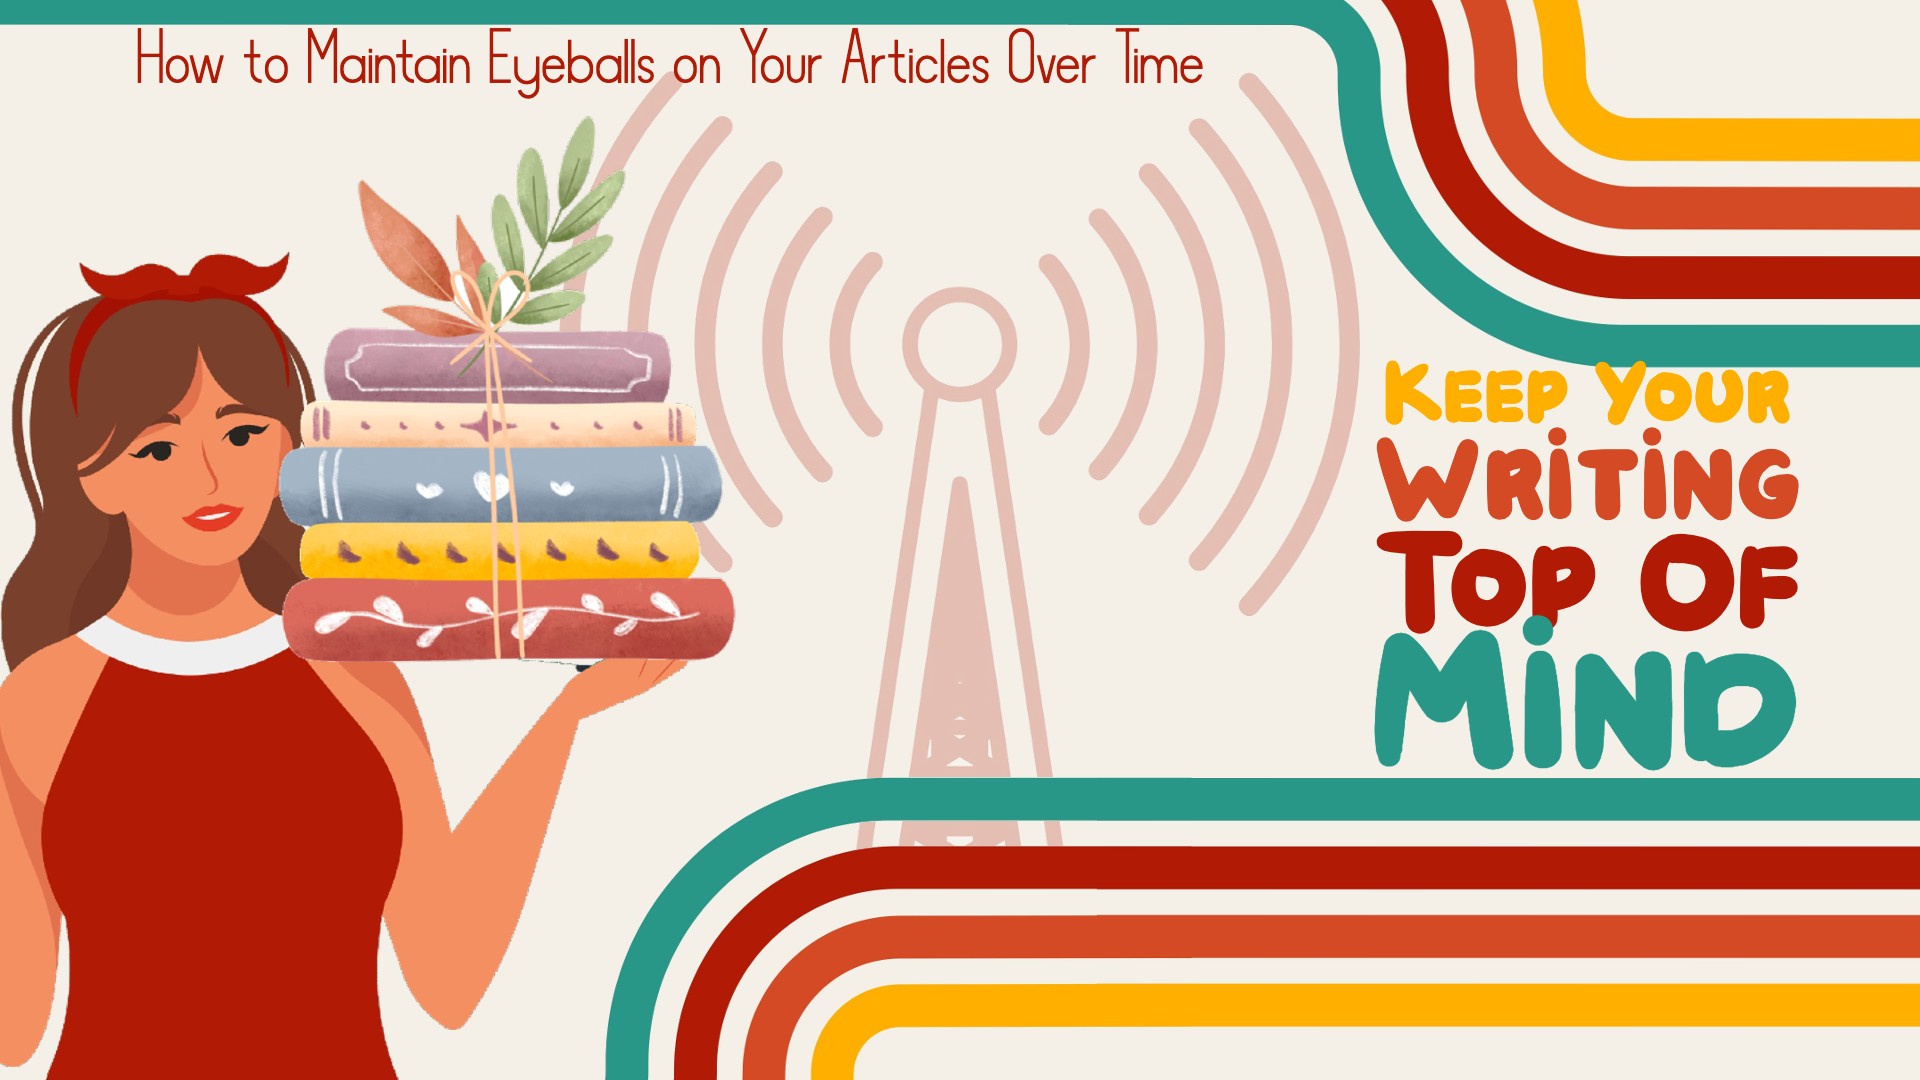 Keep Your Writing Top of Mind: How to Maintain Eyeballs on Your Articles Over Time